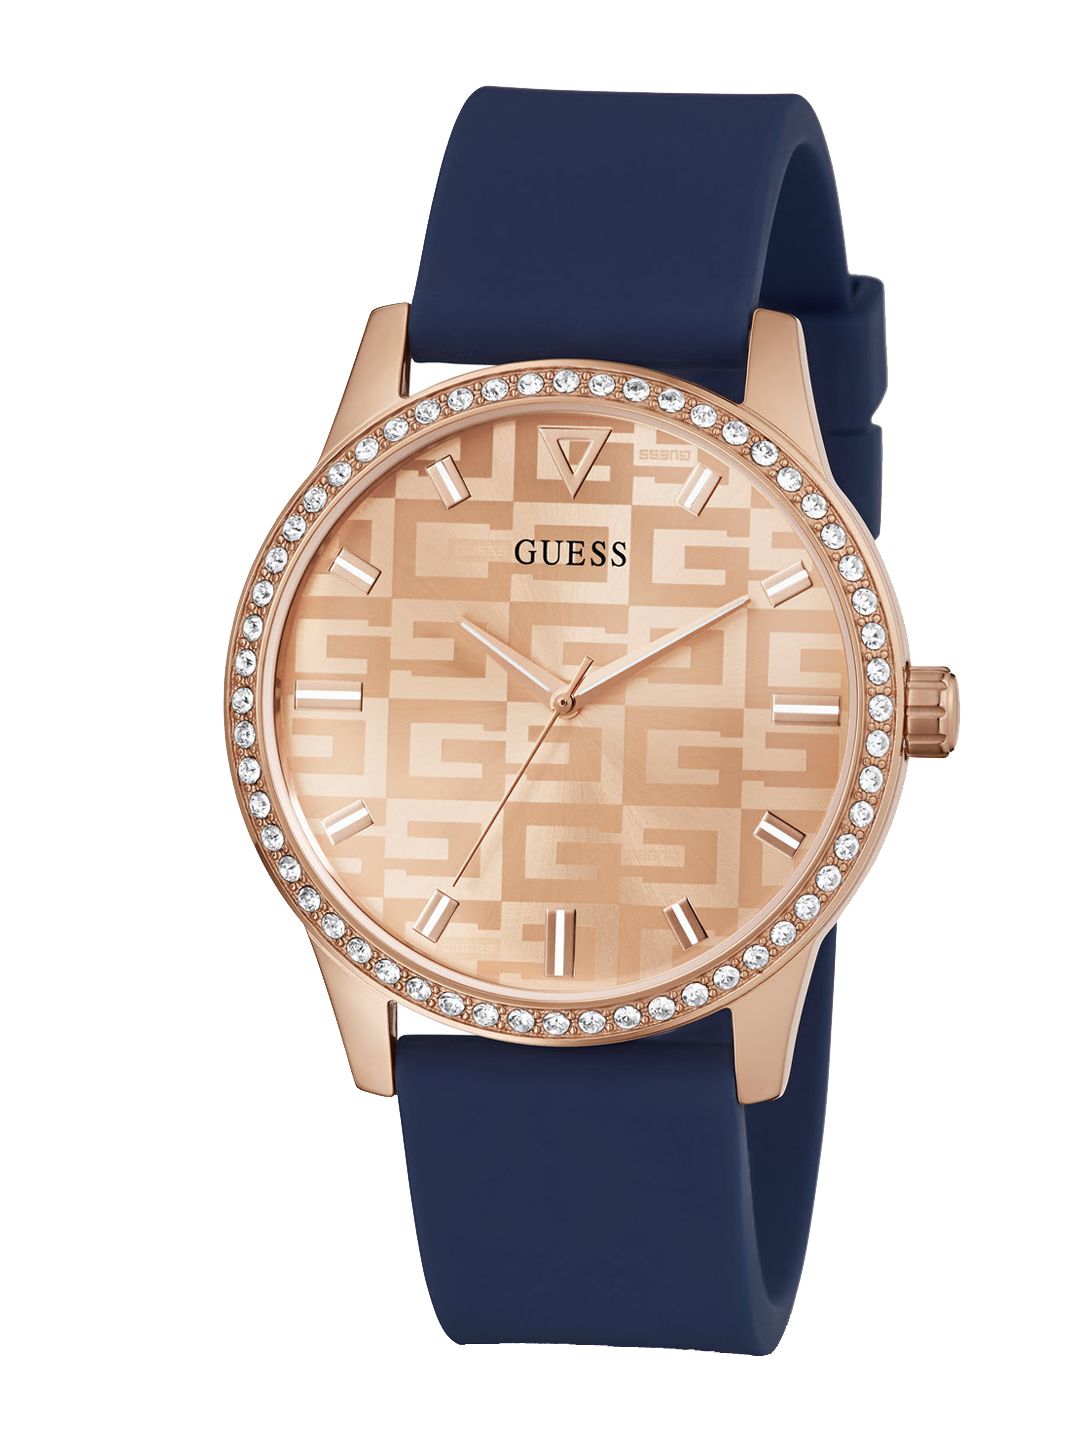 GUESS Women Rose Gold-Toned Embellished Dial & Blue Straps Analogue Watch GW0355L2 Price in India